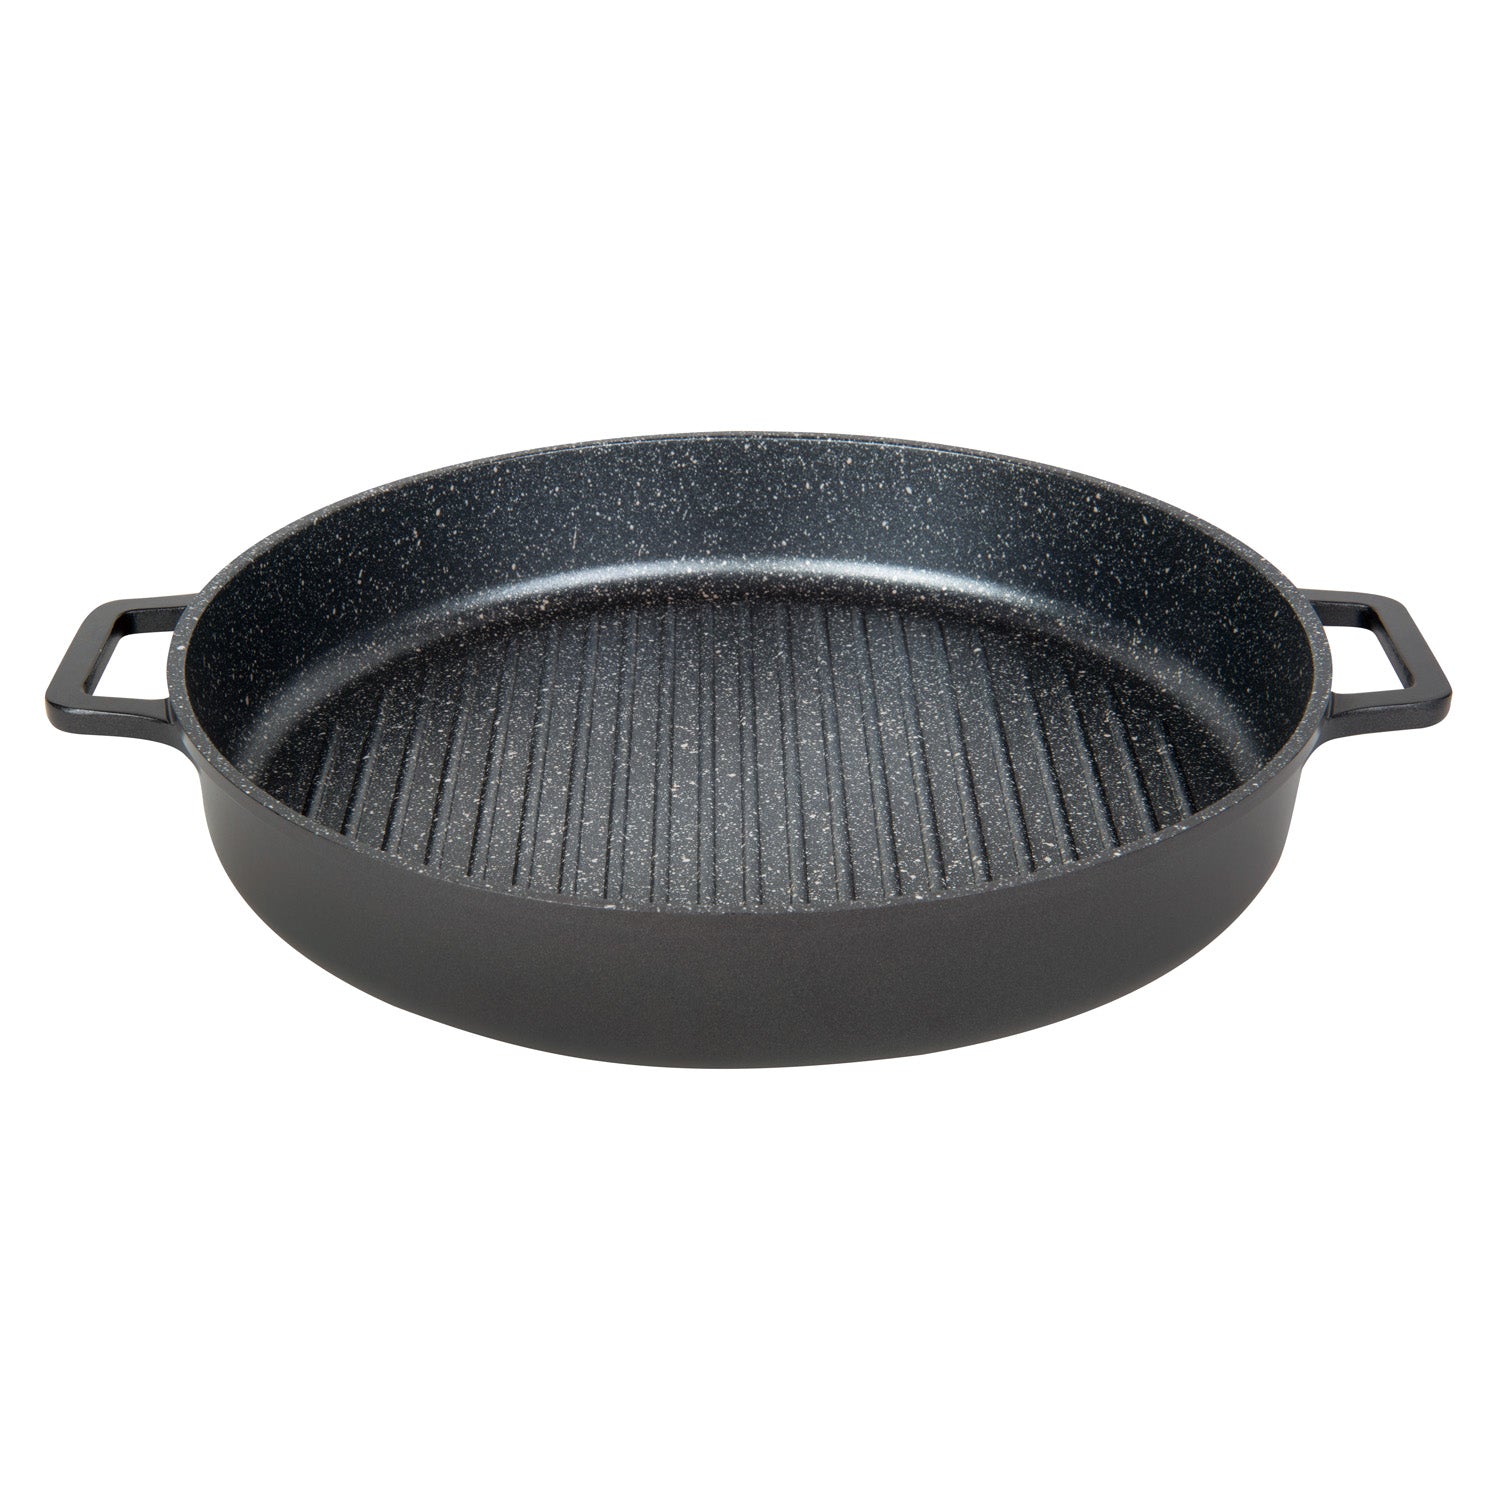  S·KITCHN Nonstick Grill Pan, Induction Stove Top Grill